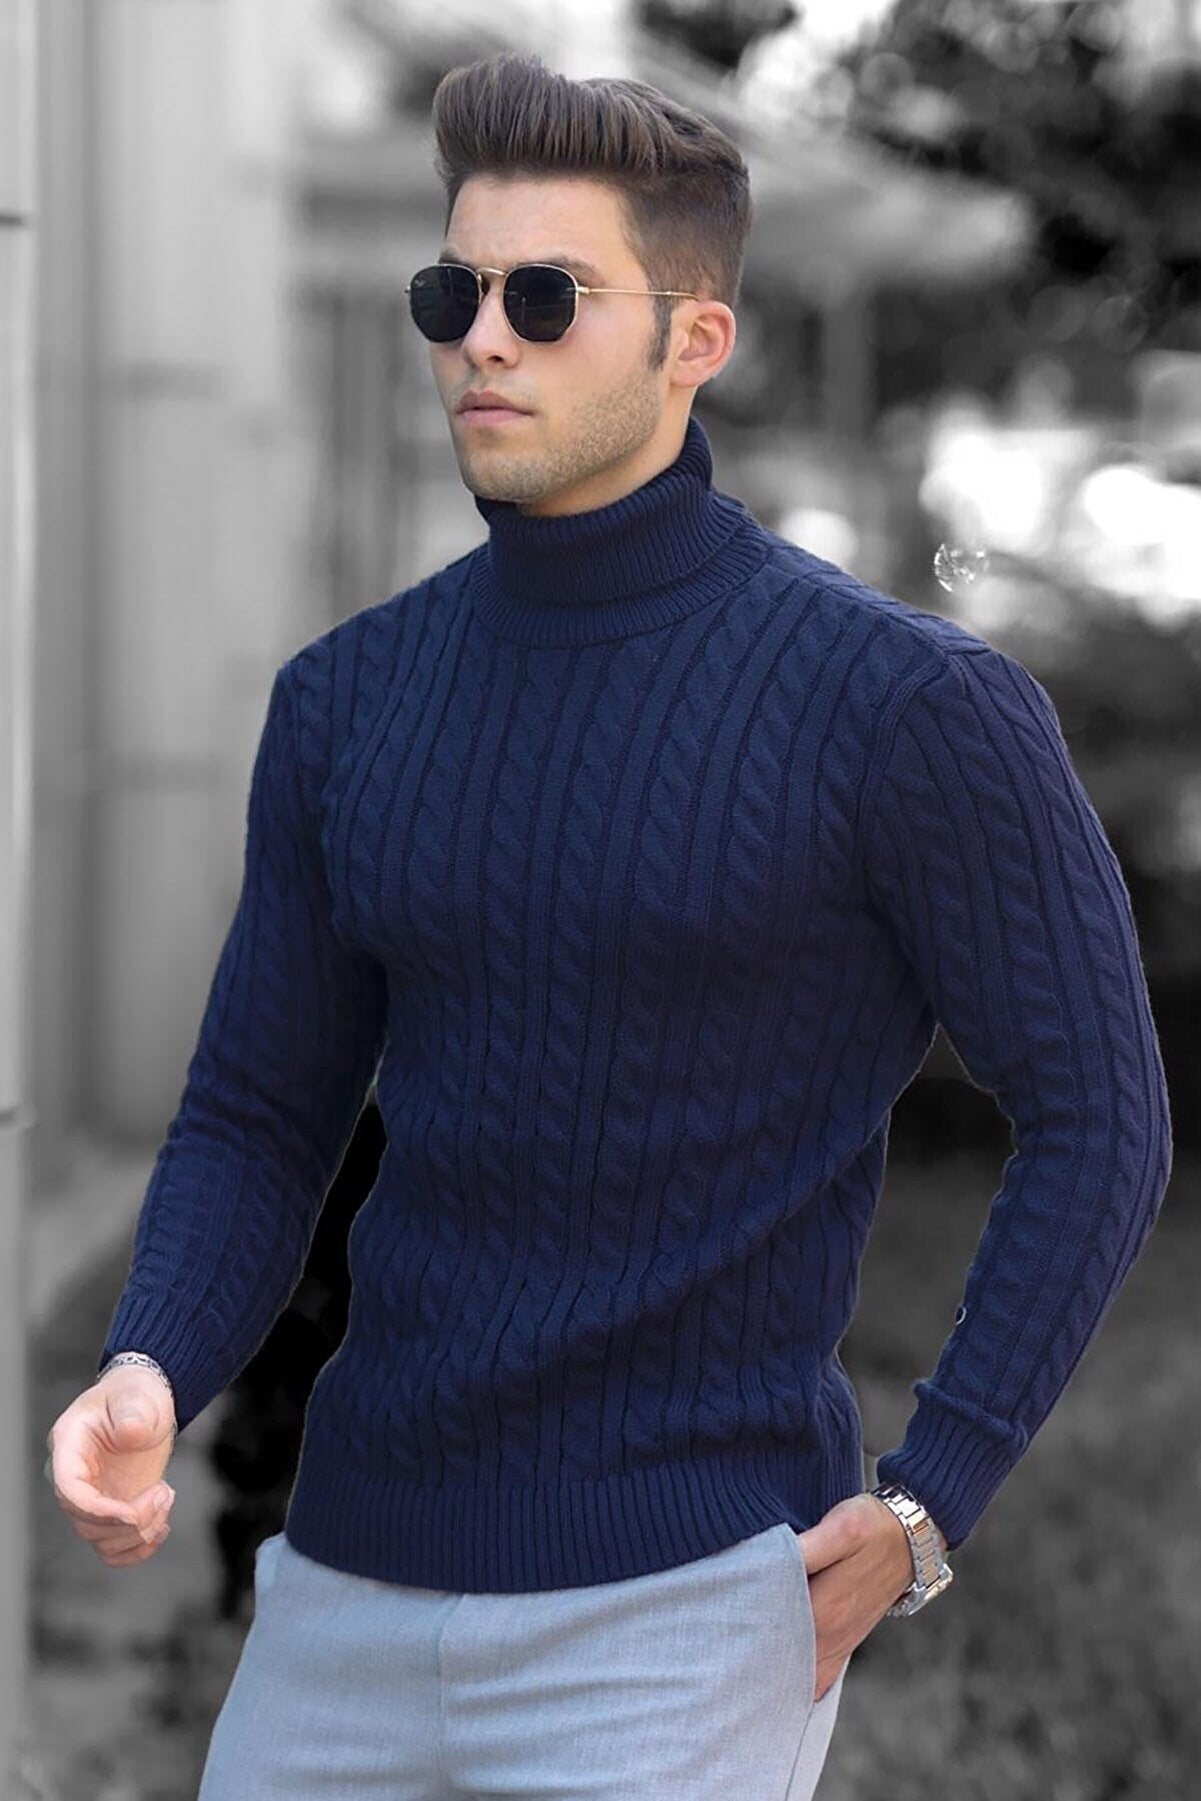 Fashionable Knitted Sweater